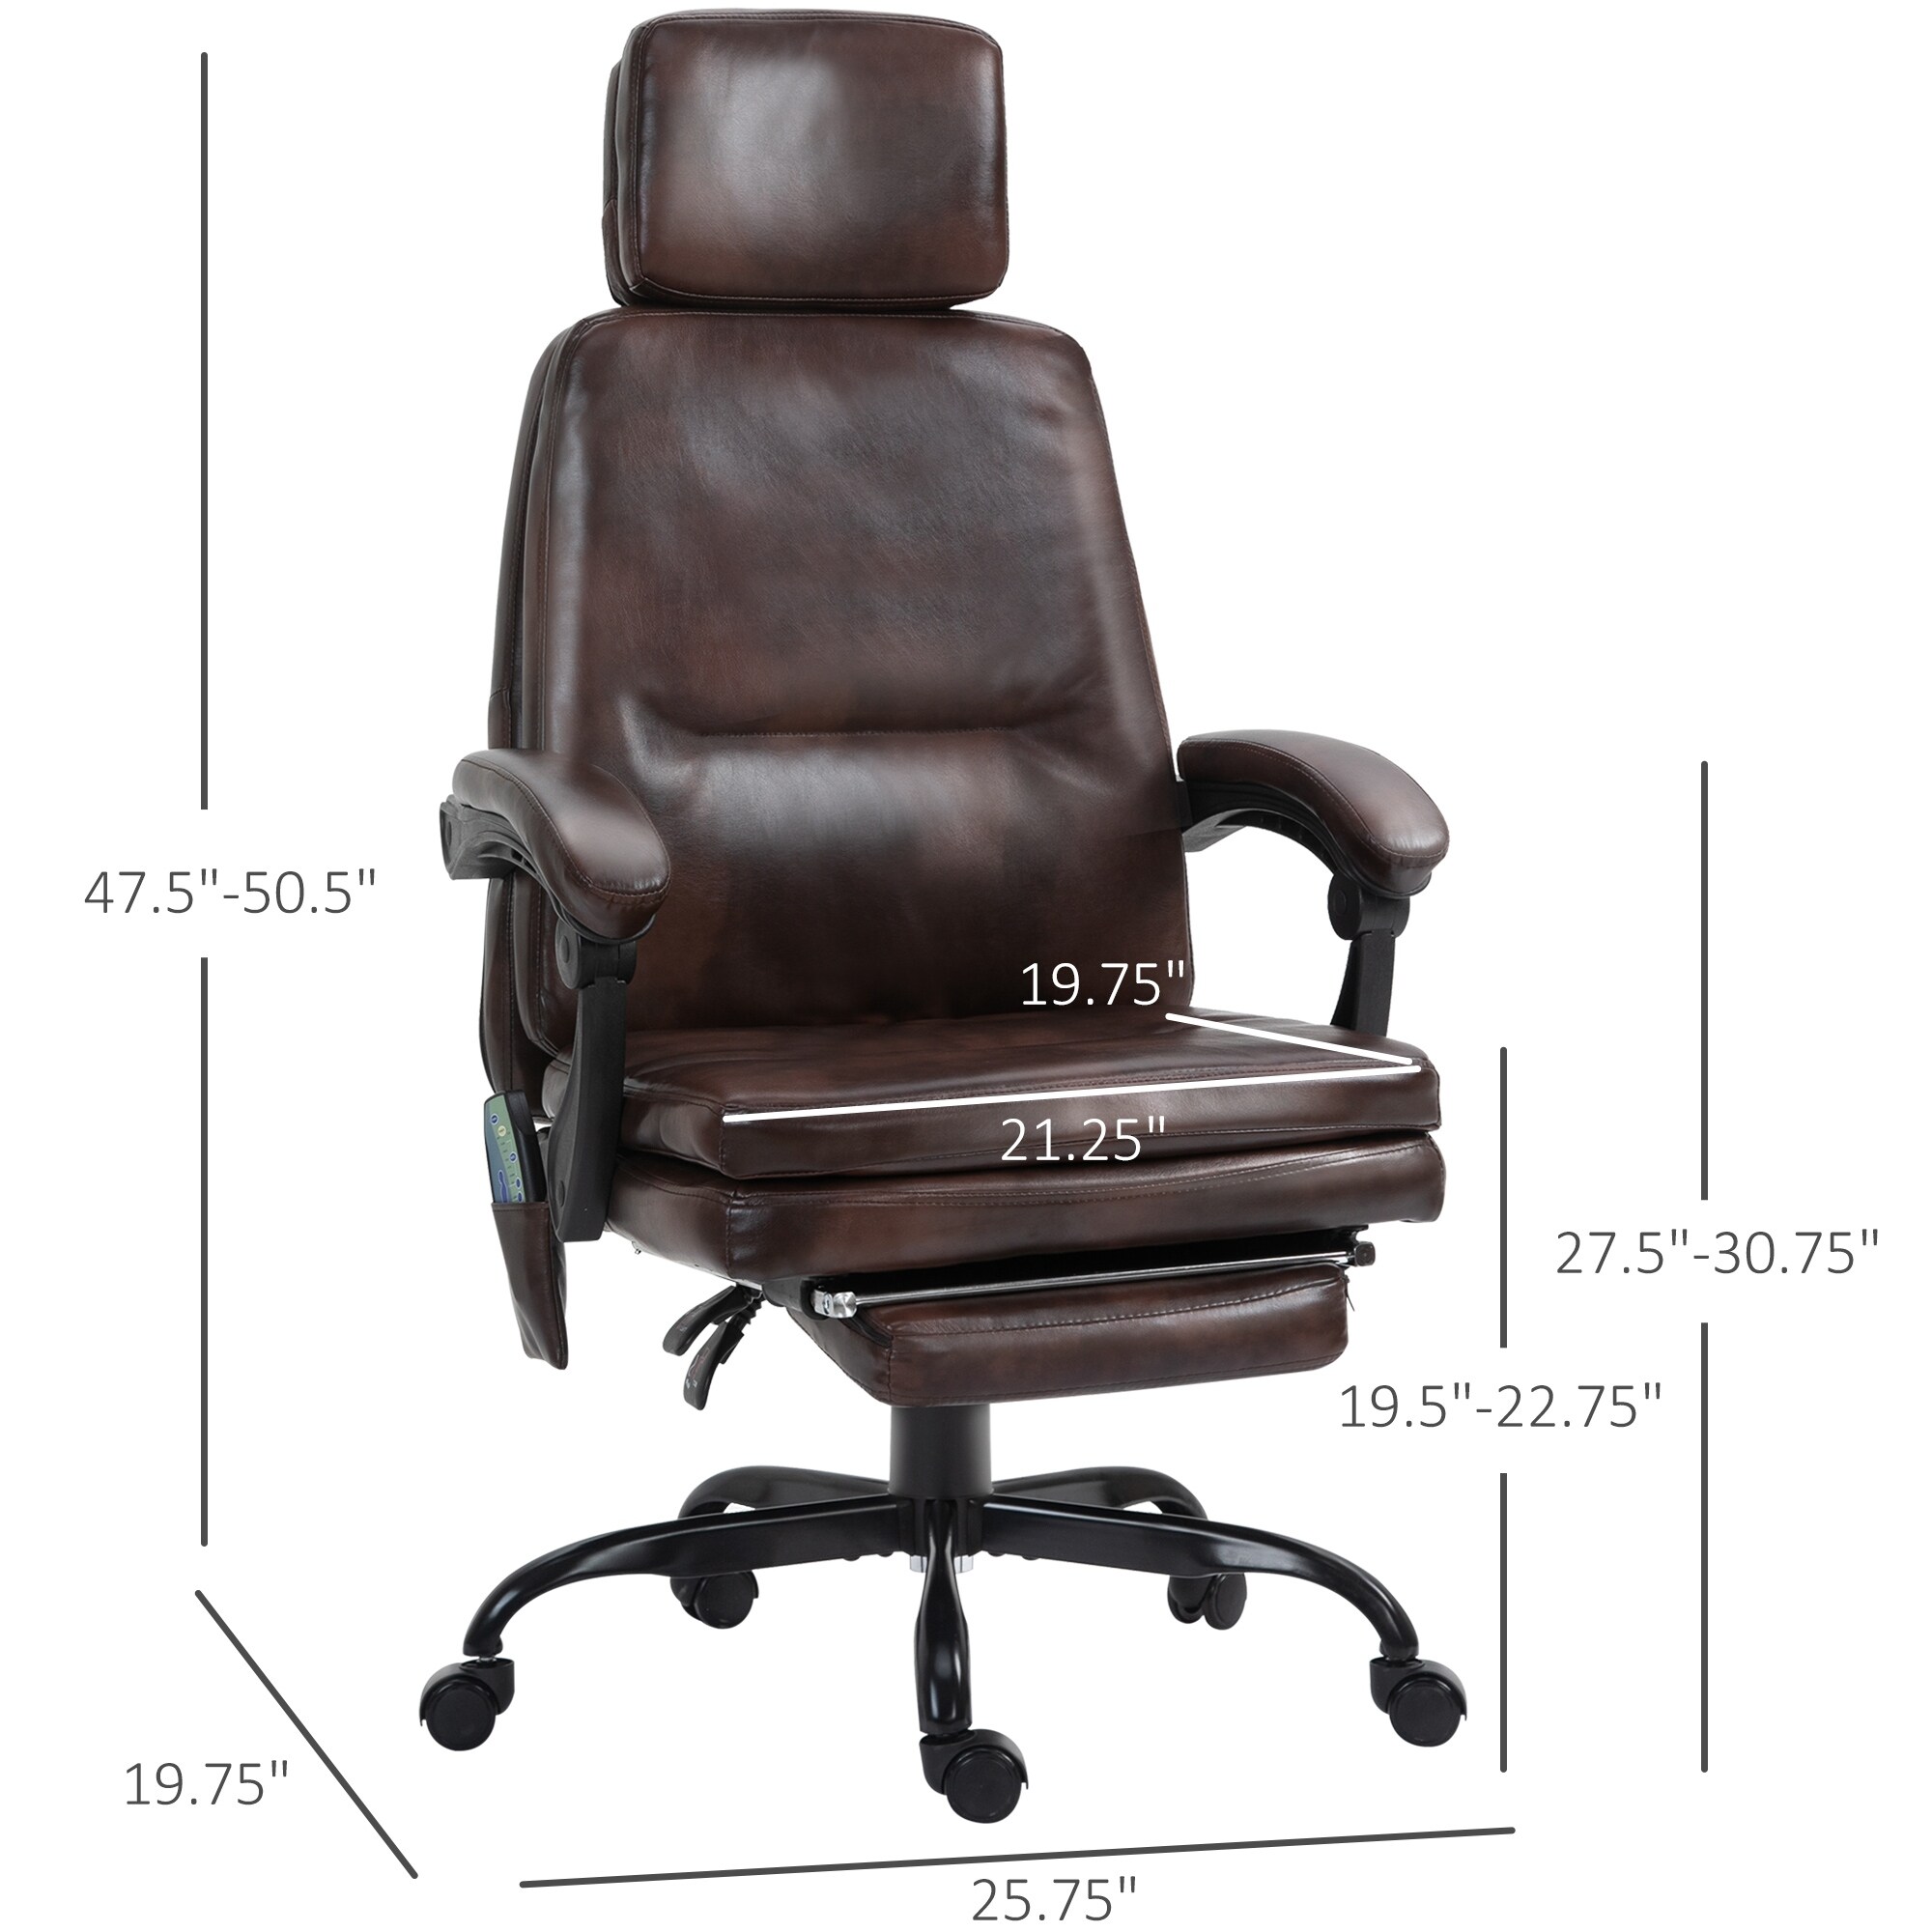 https://ak1.ostkcdn.com/images/products/is/images/direct/1da089c04e7360347831b31ccc6ed0ab6ee353d0/Vinsetto-6-Point-Vibration-Massaging-Office-Chair-with-High-Back%2C-Height-Adjustable%2C-Padded-Seat-and-Wheels.jpg